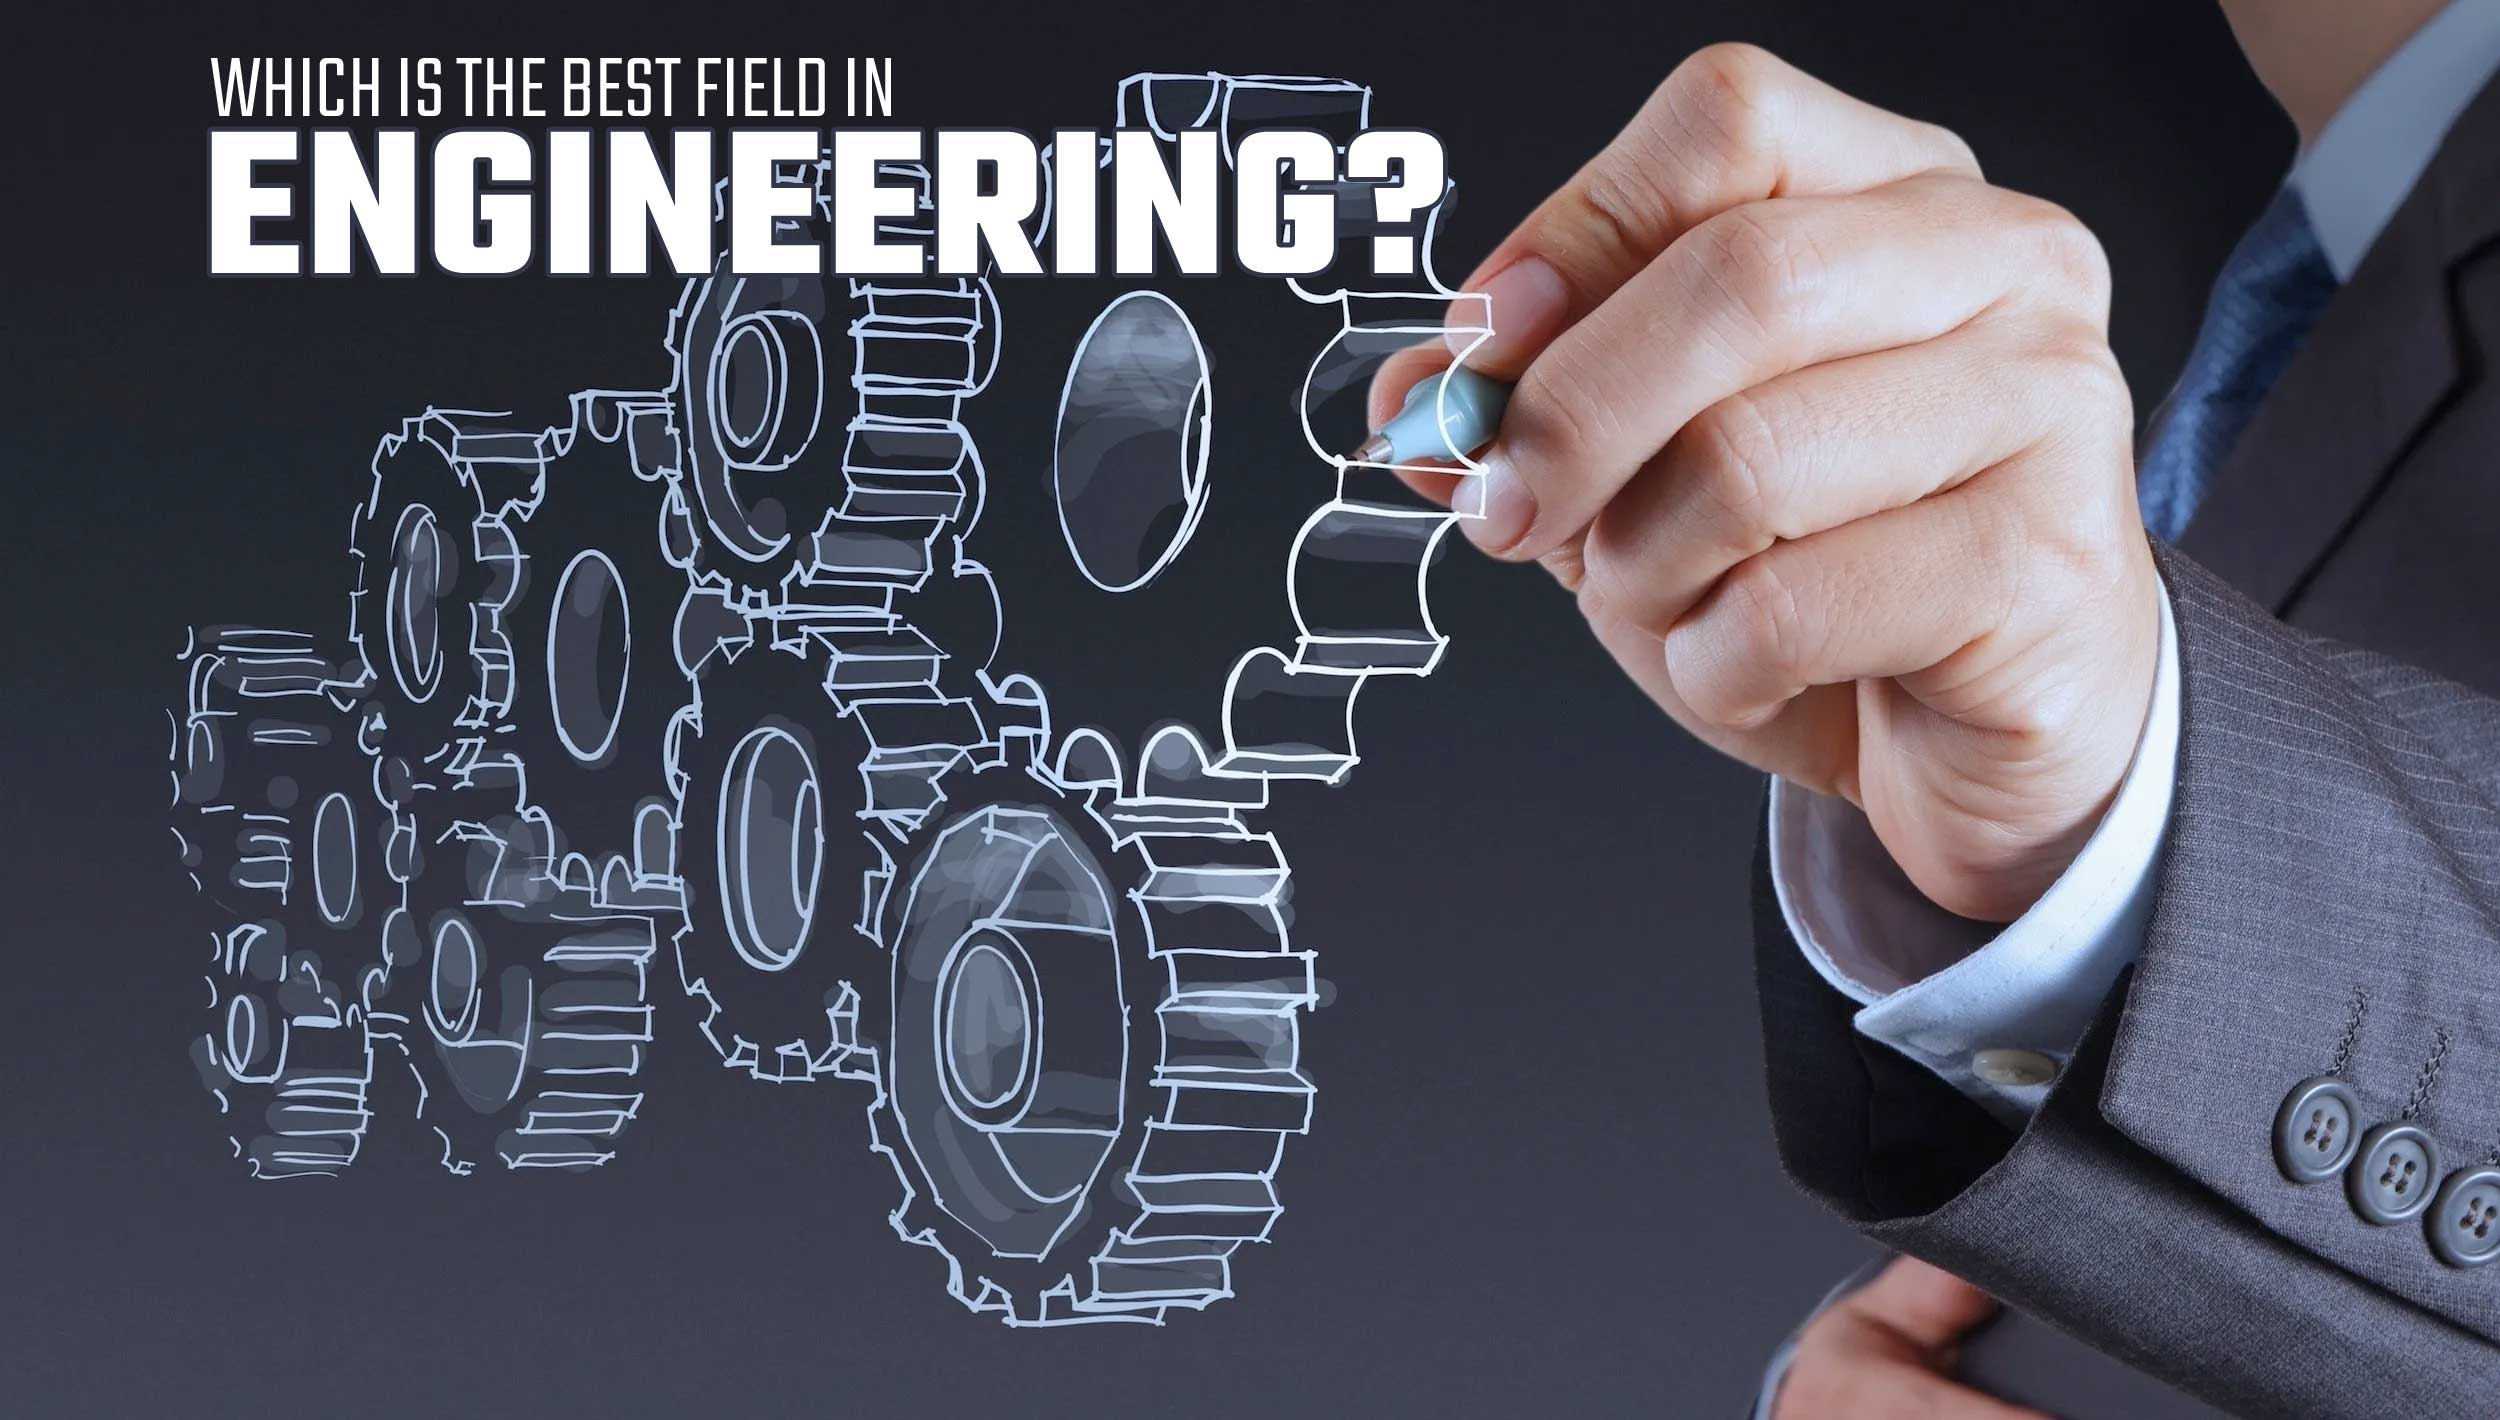 Which Is The Best Field In Engineering?